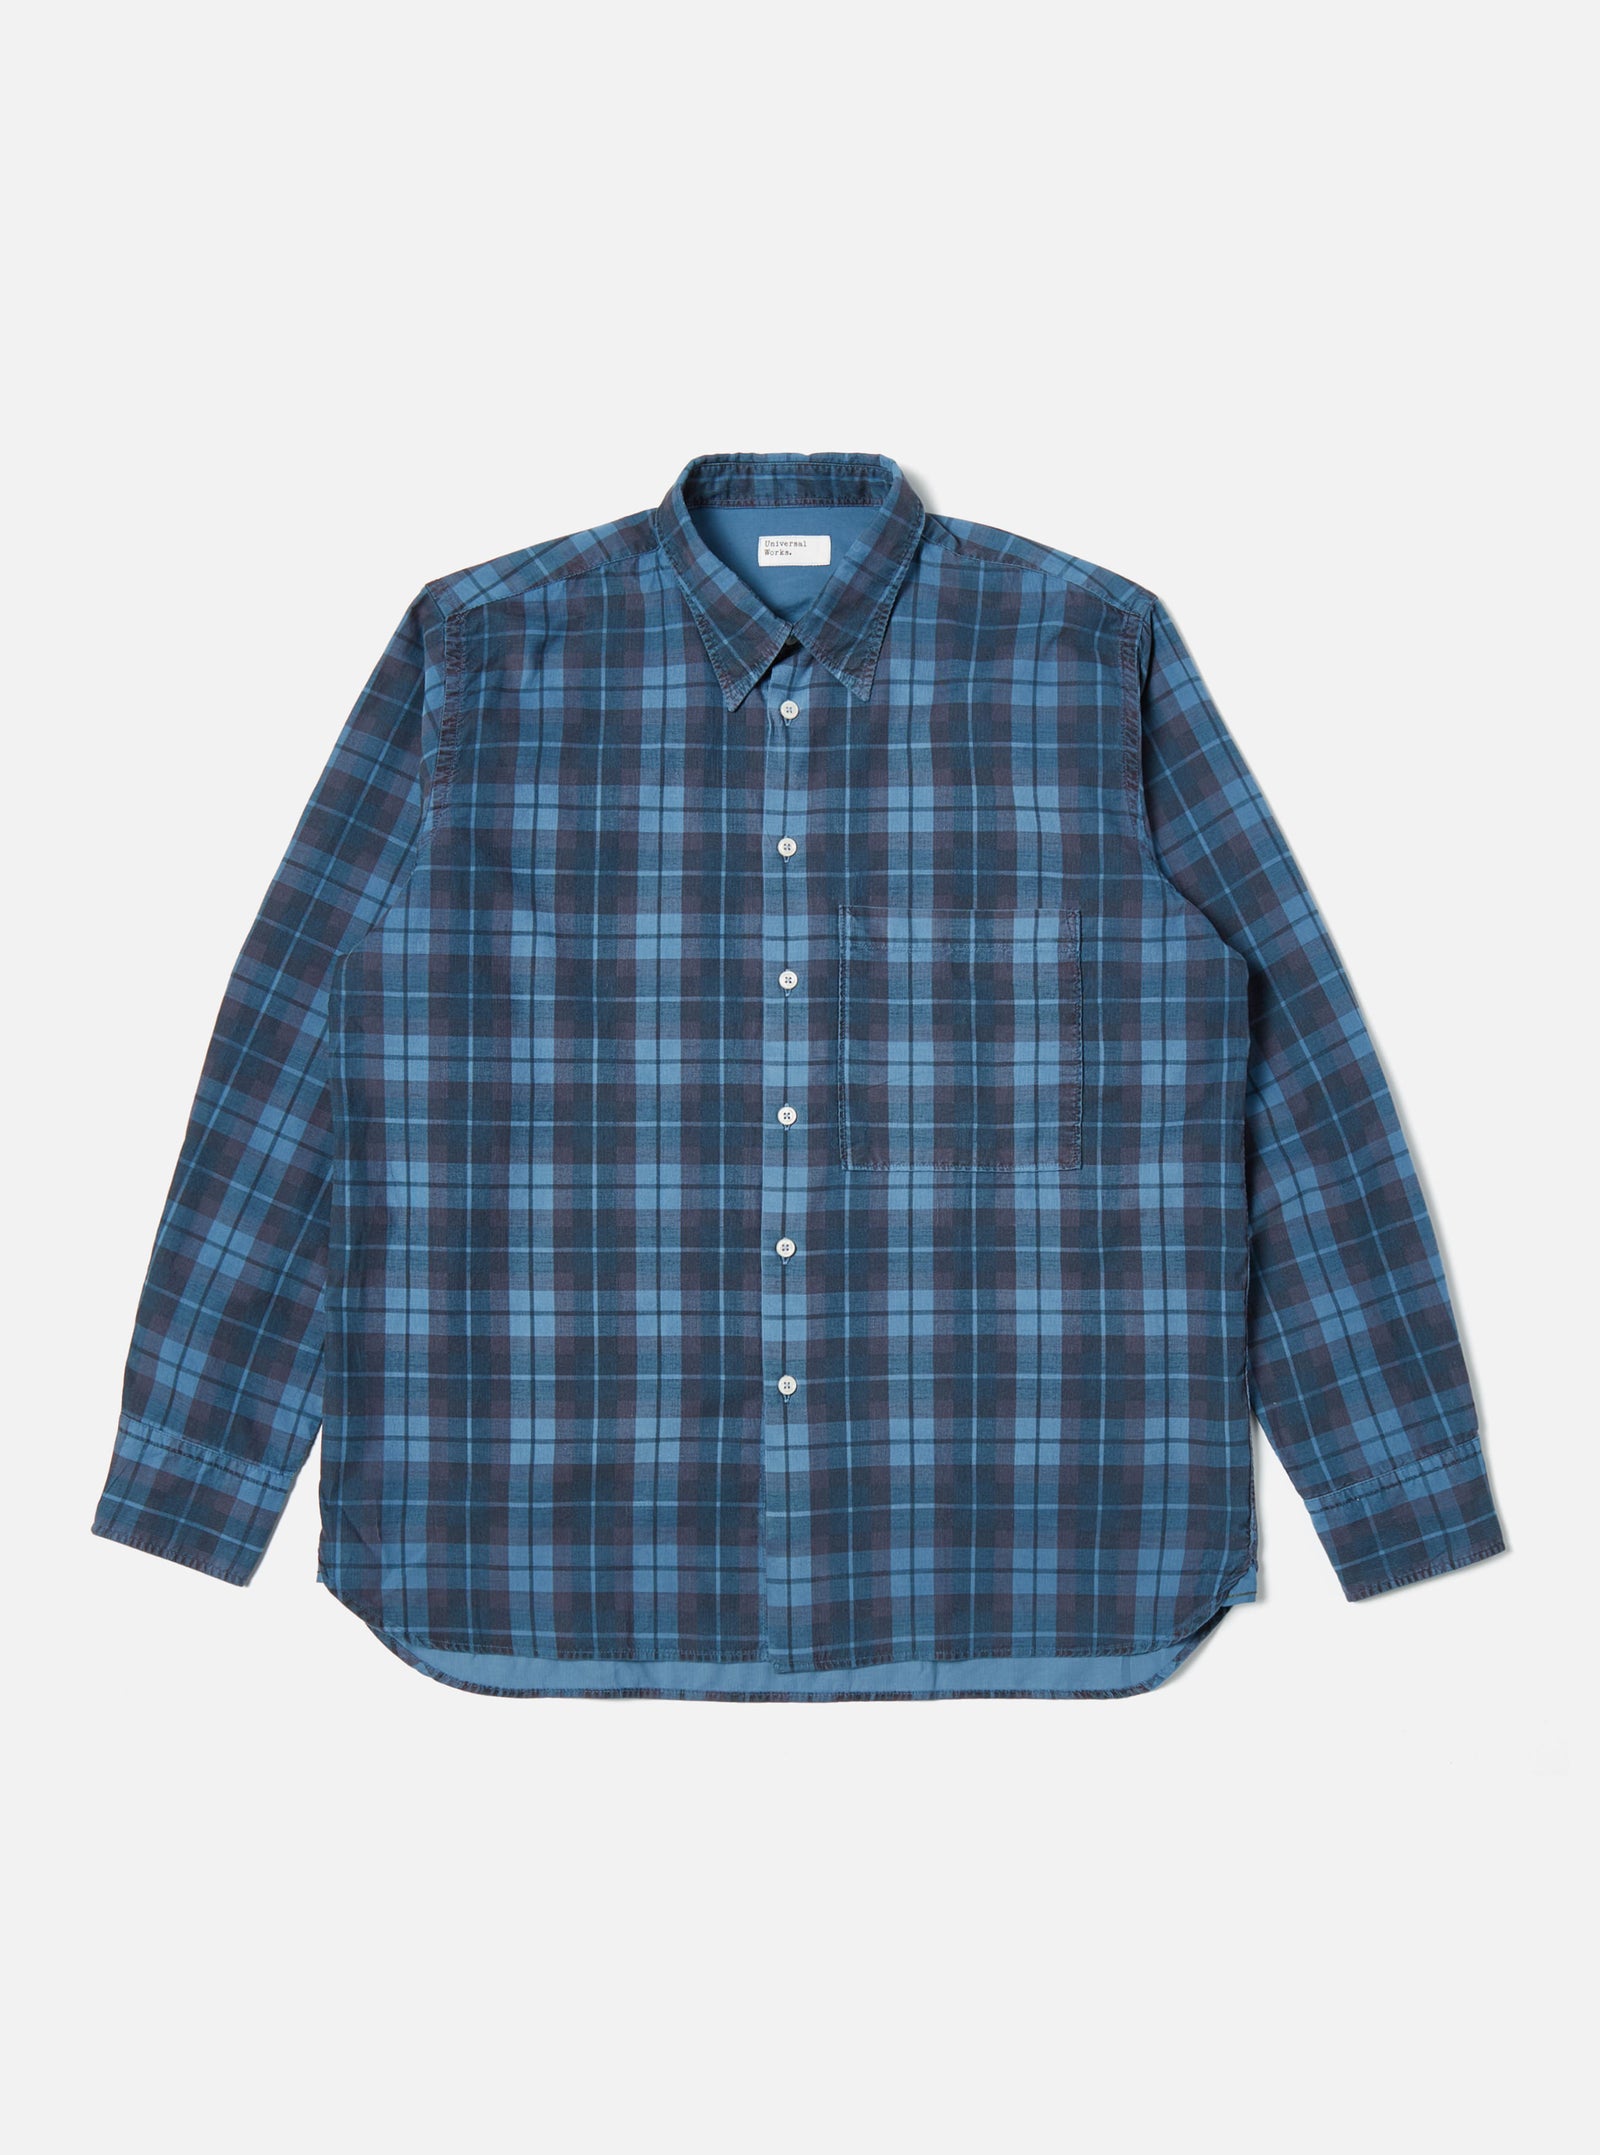 Universal Works Square Pocket Shirt in Blue Check Cord